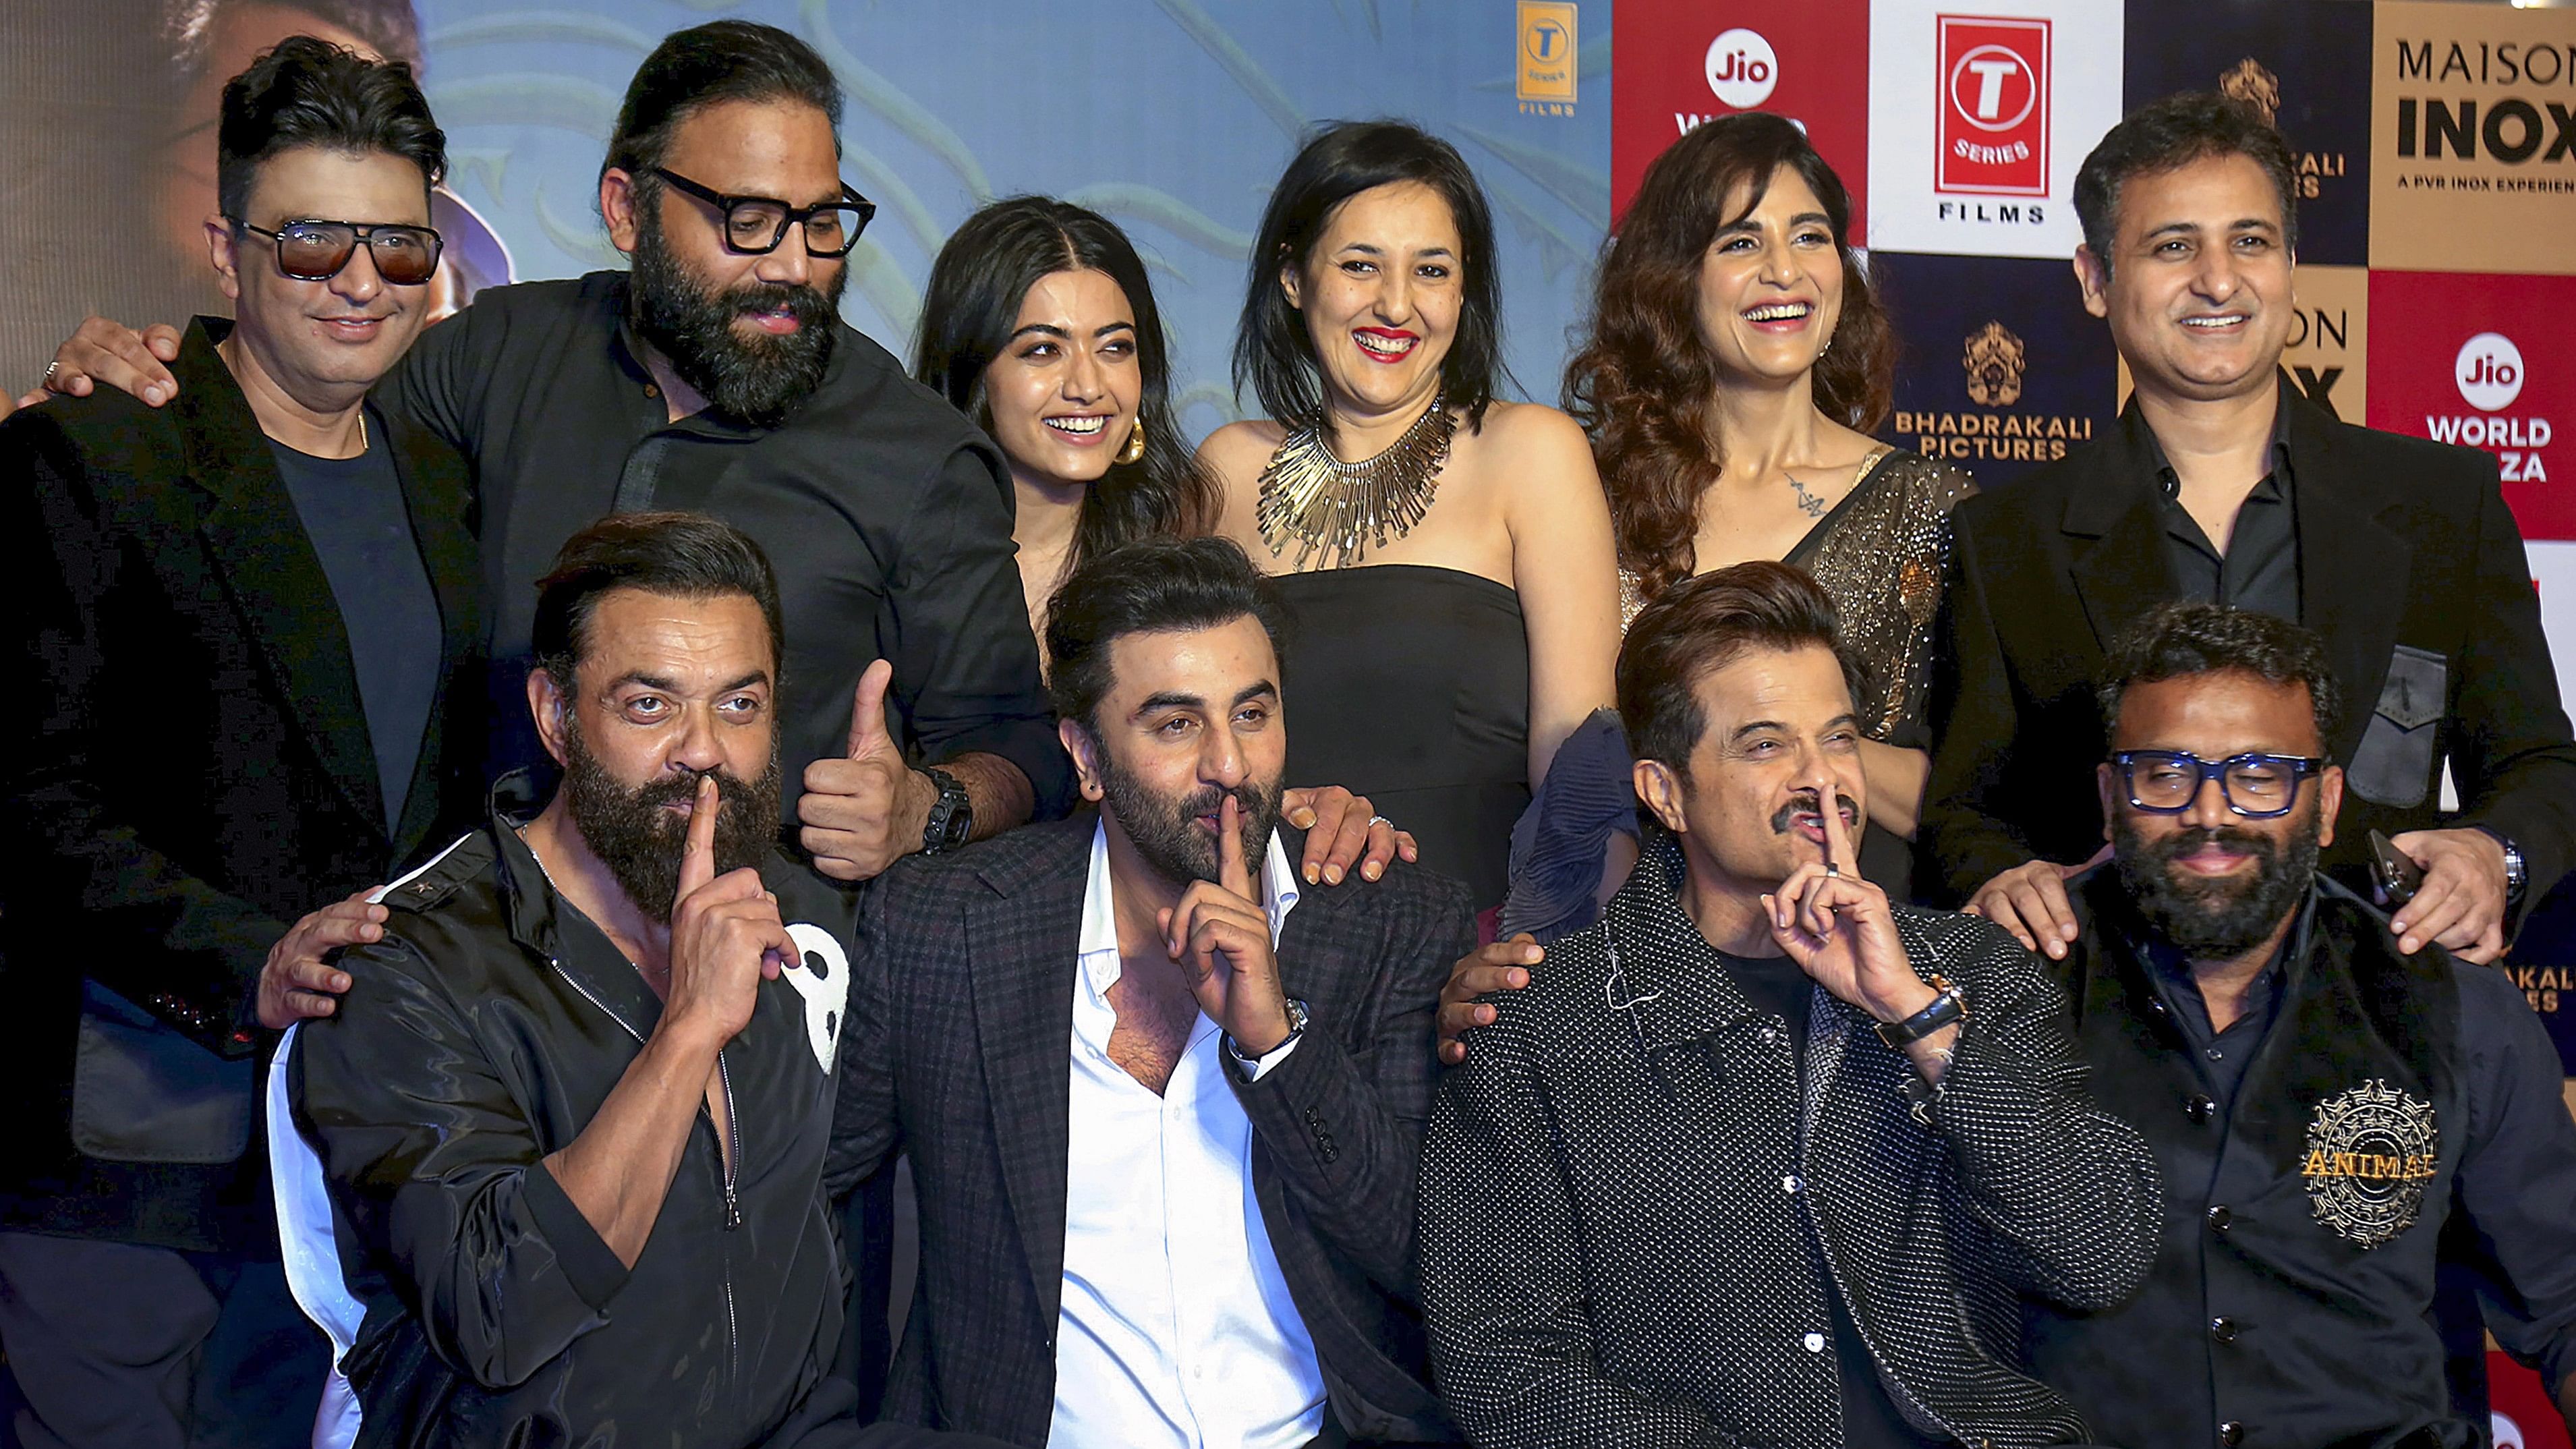 <div class="paragraphs"><p>Actors Ranbir Kapoor, Rashmika Mandanna, Anil Kapoor, Bobby Deol and other cast of the upcoming film 'Animal' during promotions.</p></div>